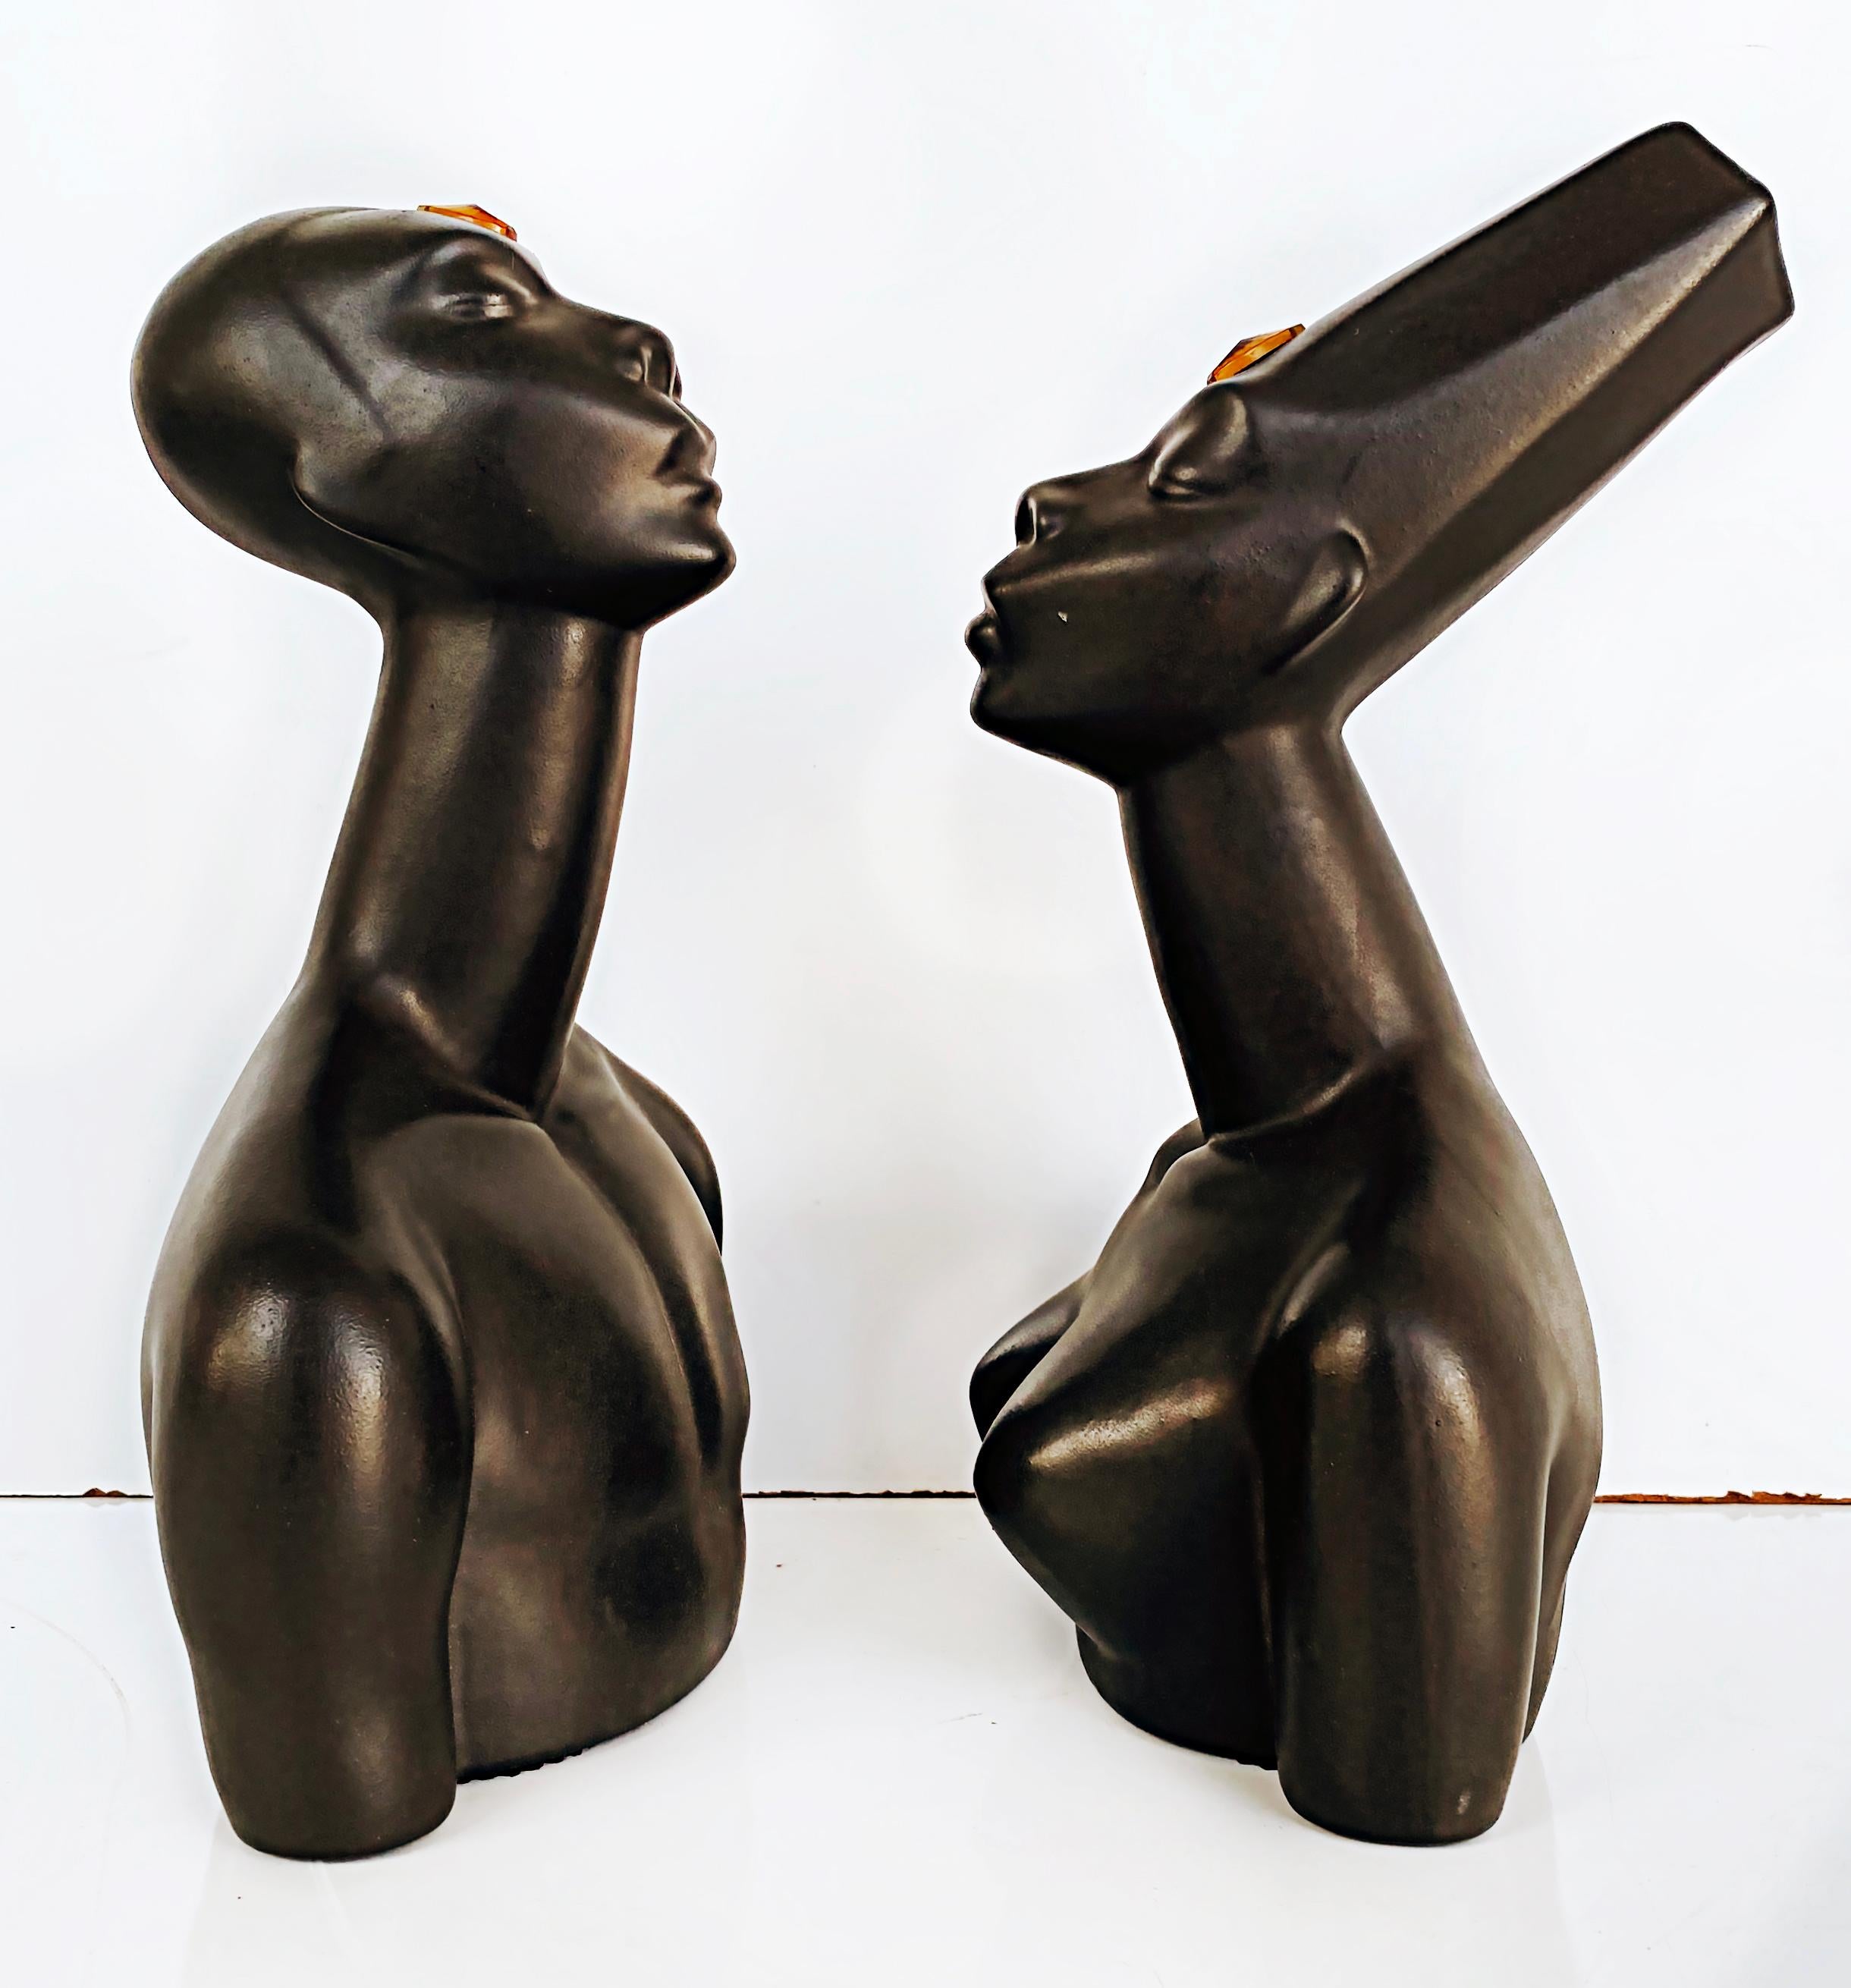 50s California Modern Brayton Laguna pottery African busts male, female.

Offered for sale is a rare and highly collectible pair of California Mid-Century Modern ceramic pottery busts by Brayton Laguna Pottery and designed by Peter Ganine circa